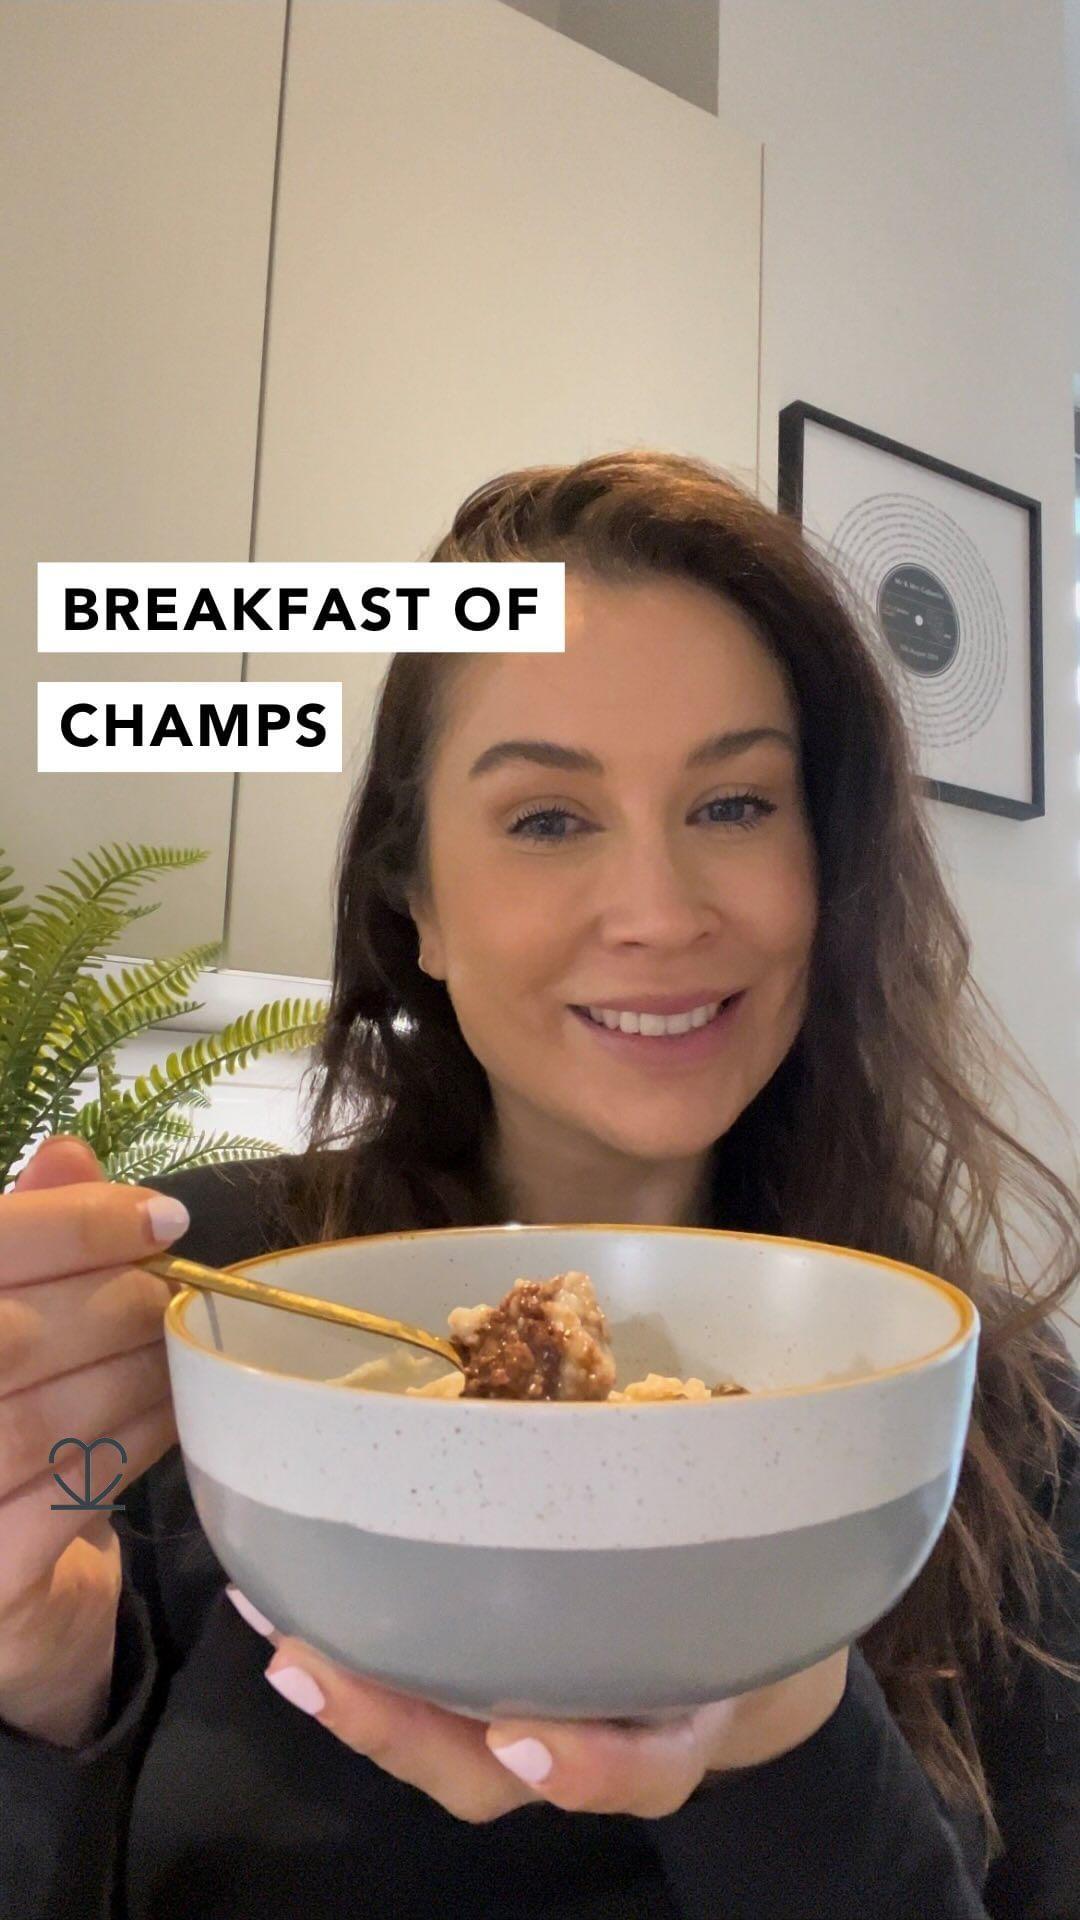 class="content__text"
 Don’t worry, Be Happy… with this breakfast of champs. Tomorrow morning try this protein porridge with the wholesome goodness of seeds, nuts and a cheeky little CBD dark choc. Fuel your day! 

 #LoveHemp #LoveLife 
 